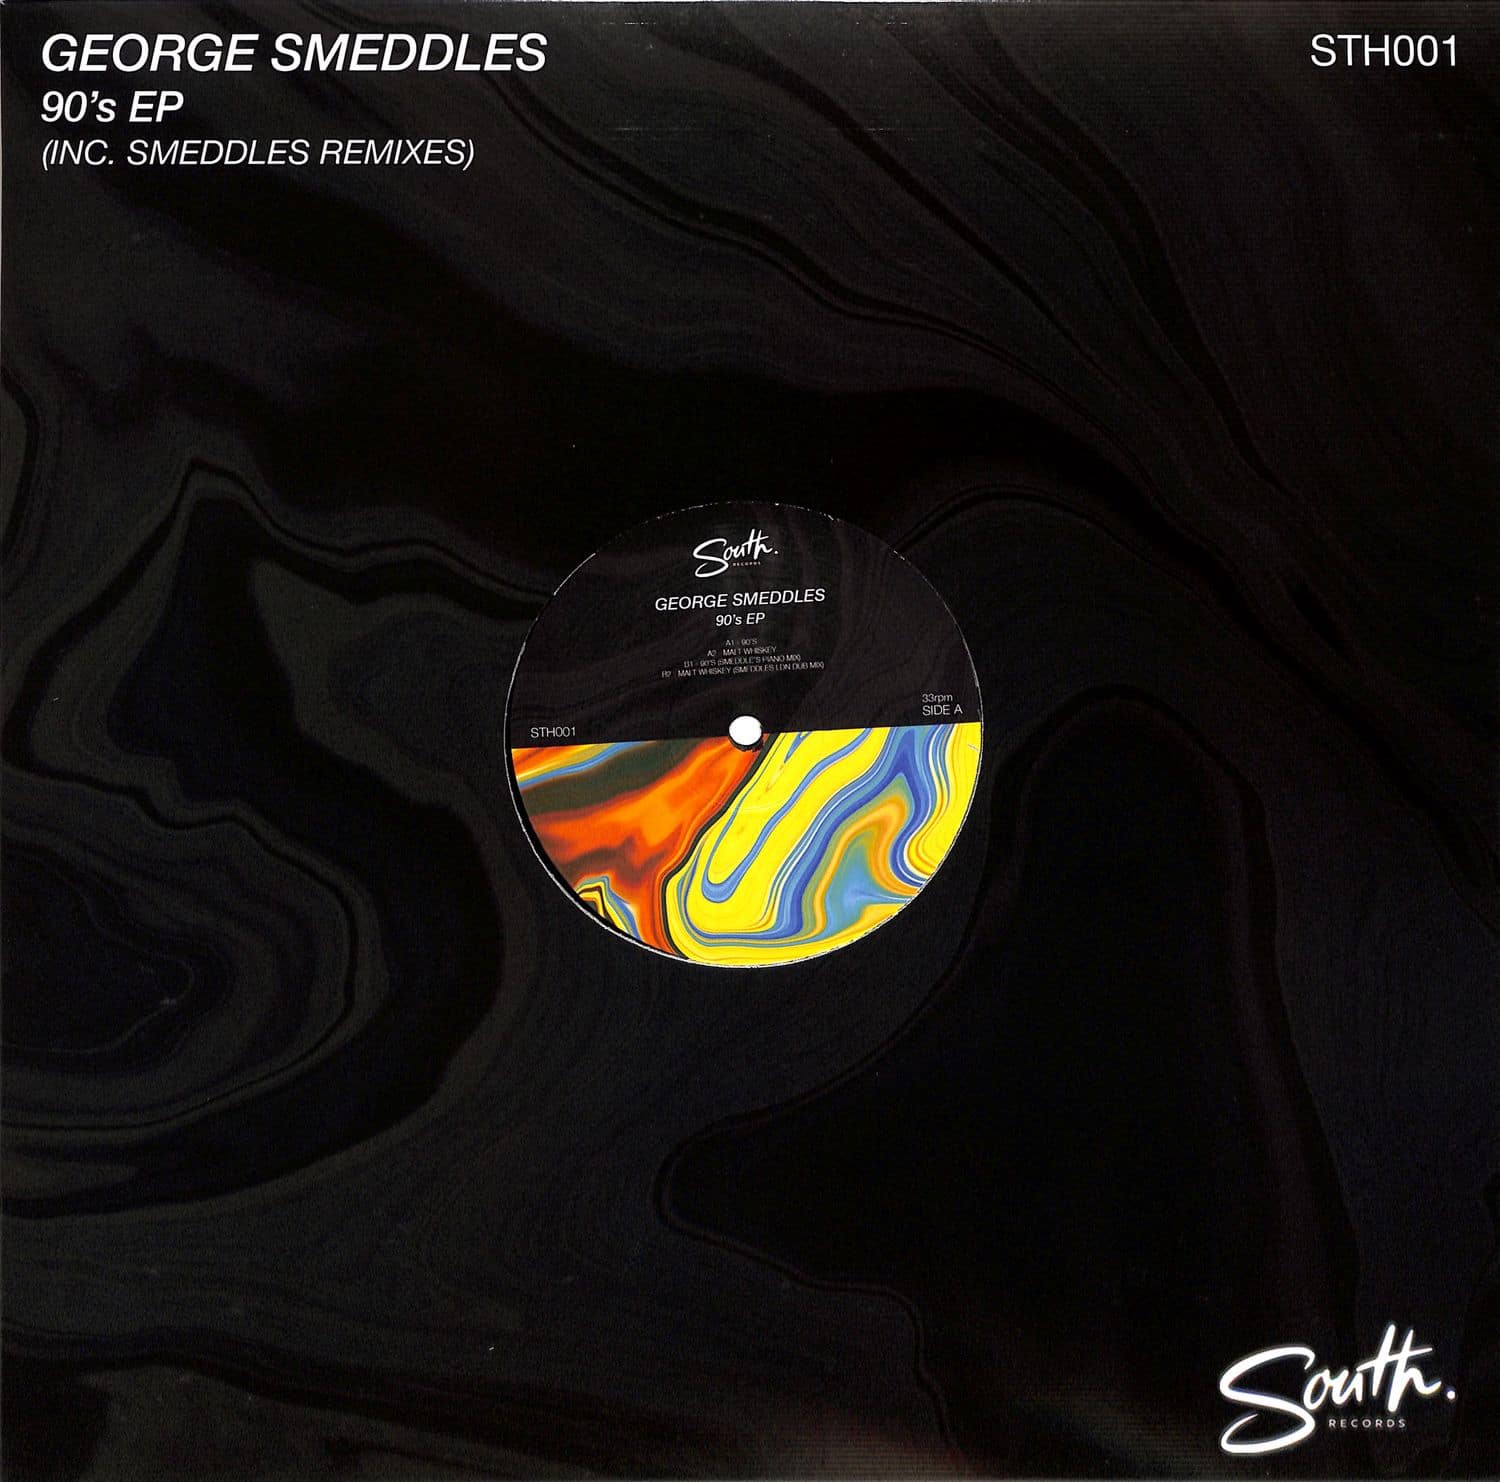 George Smeddles - 90S EP